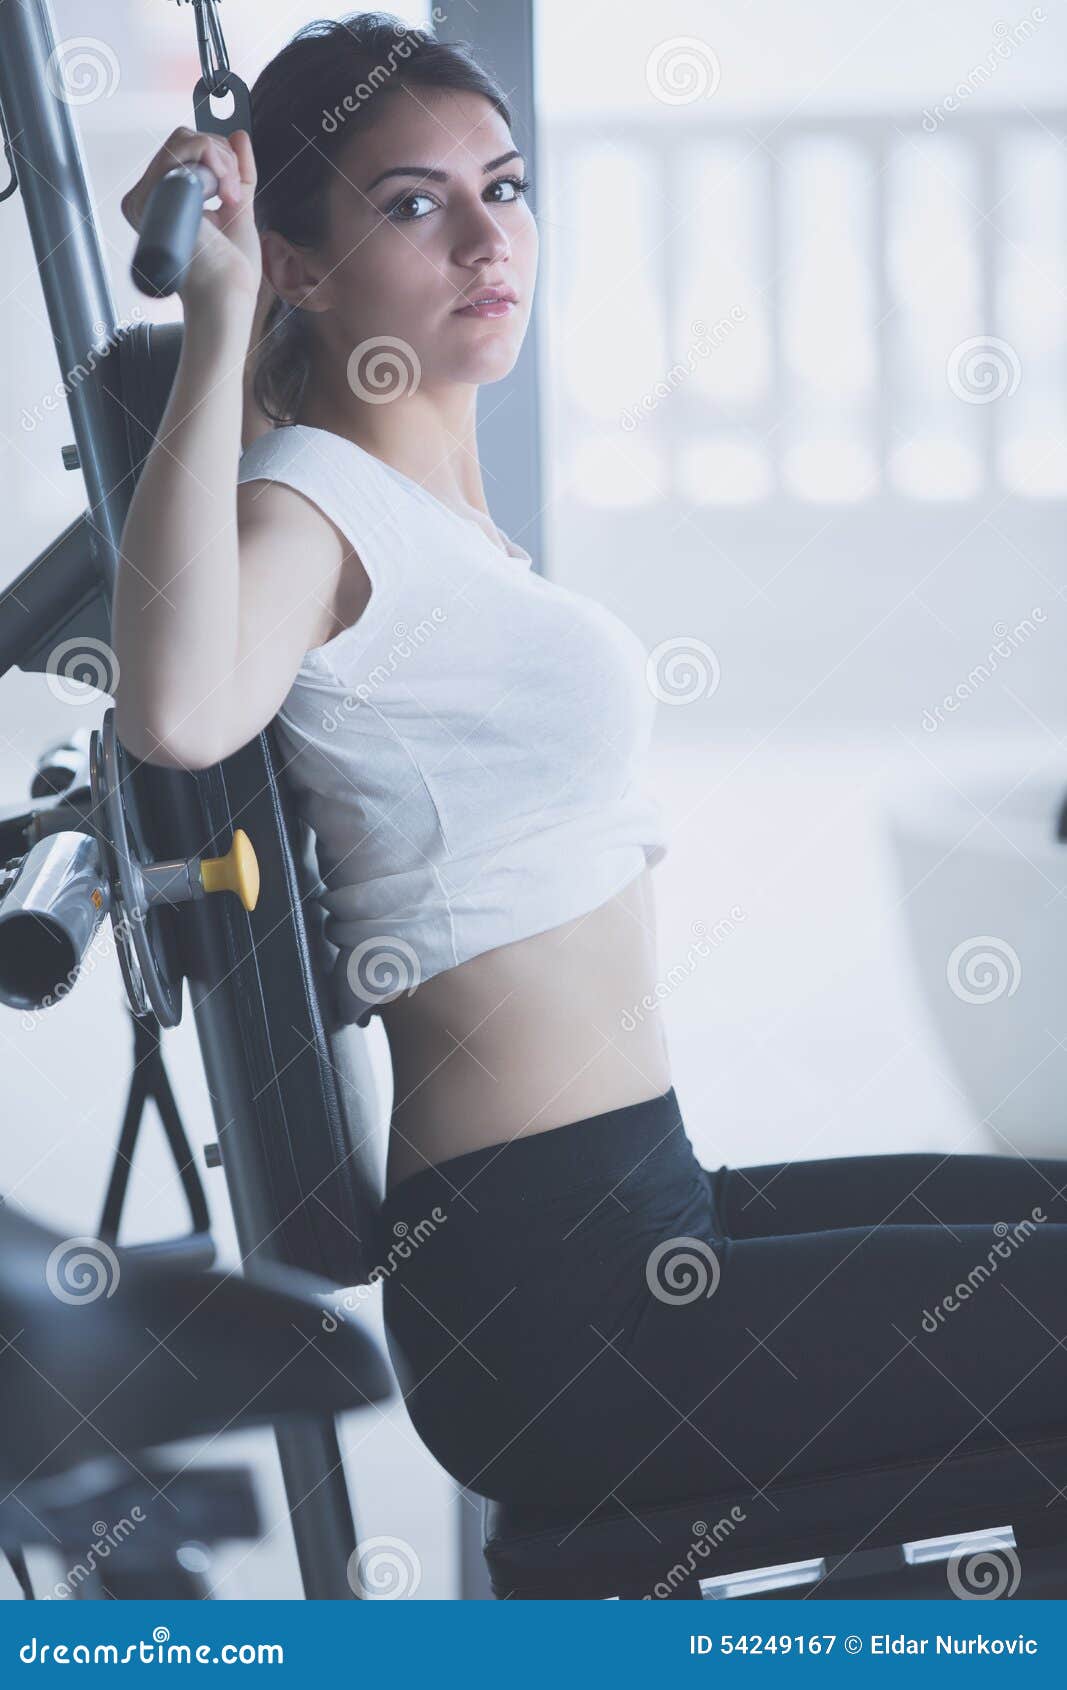 woman weight training at gym.exercising on pull down weight machine.woman doing pull-ups exercising lifting dumbbells.cardio and